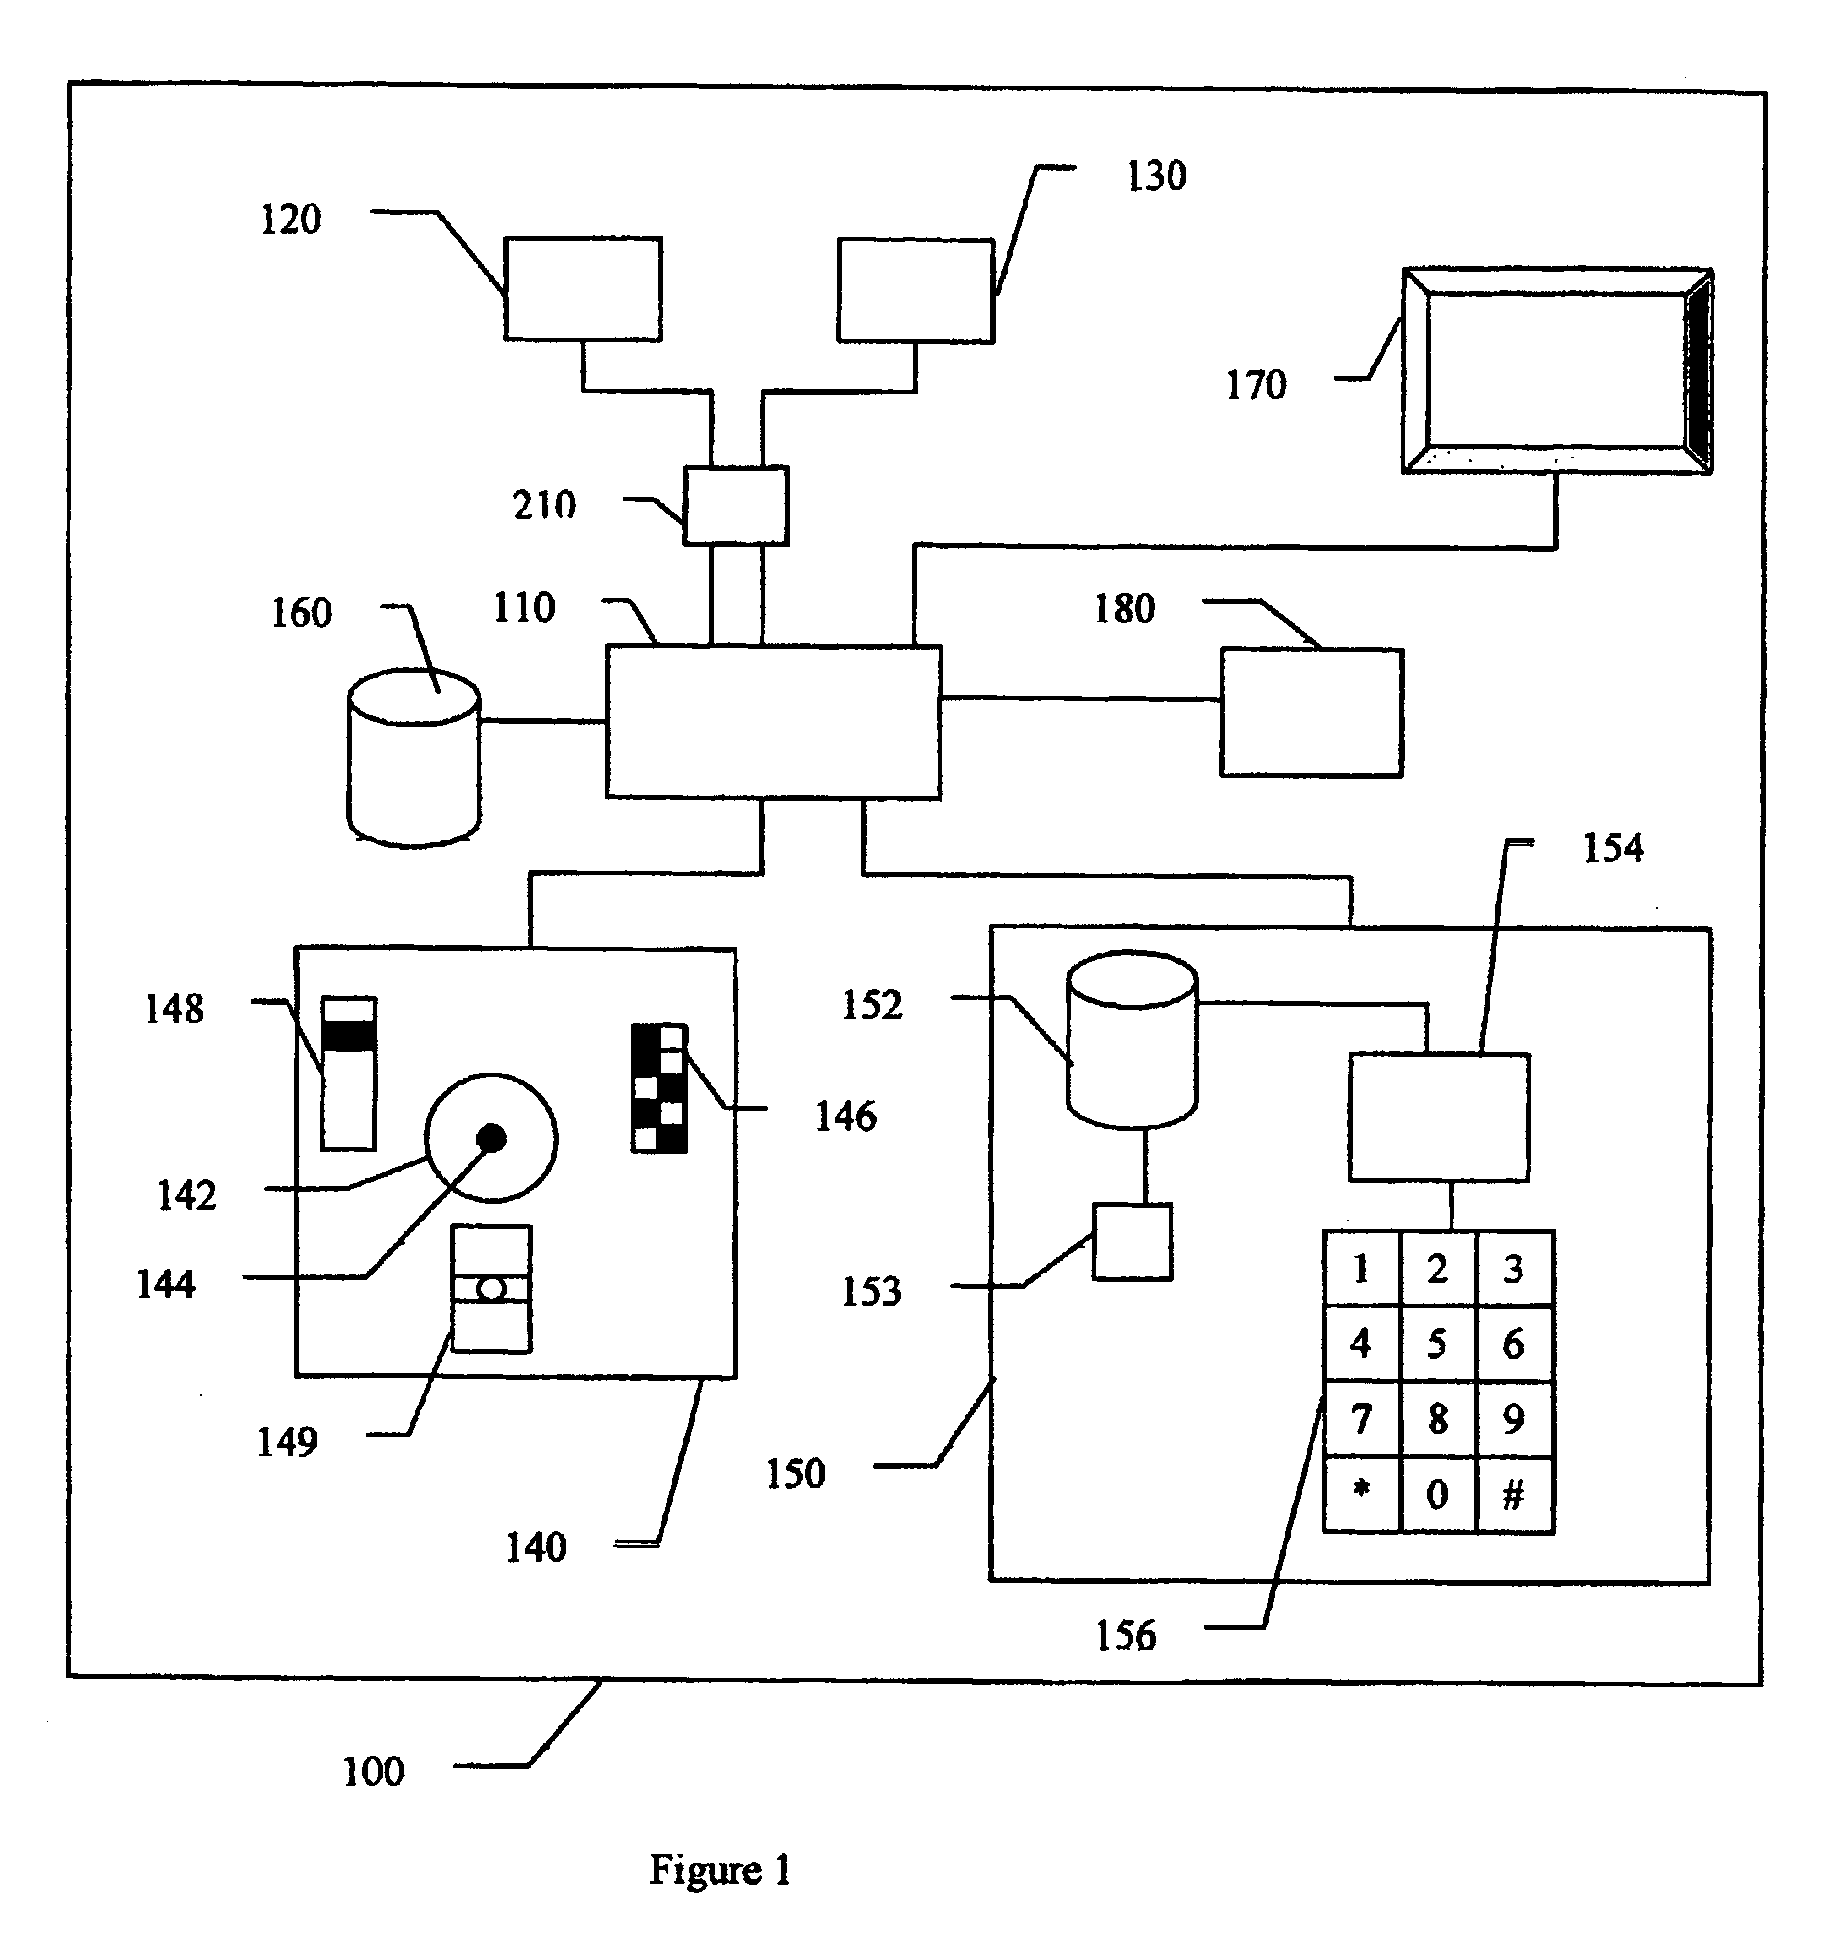 Biometric identification device and methods for secure transactions